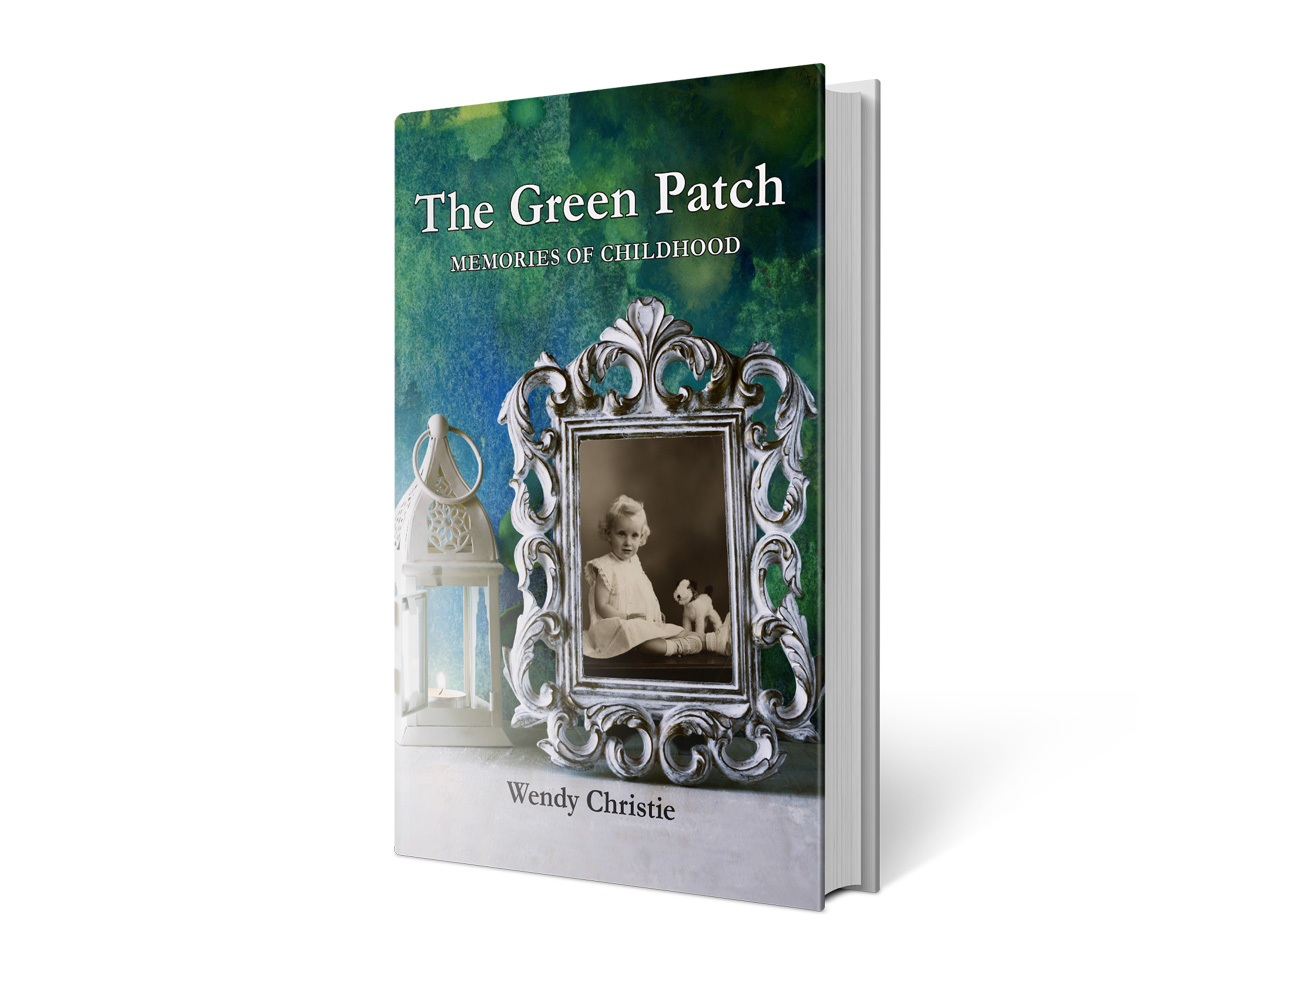 The Green Patch, Family history book